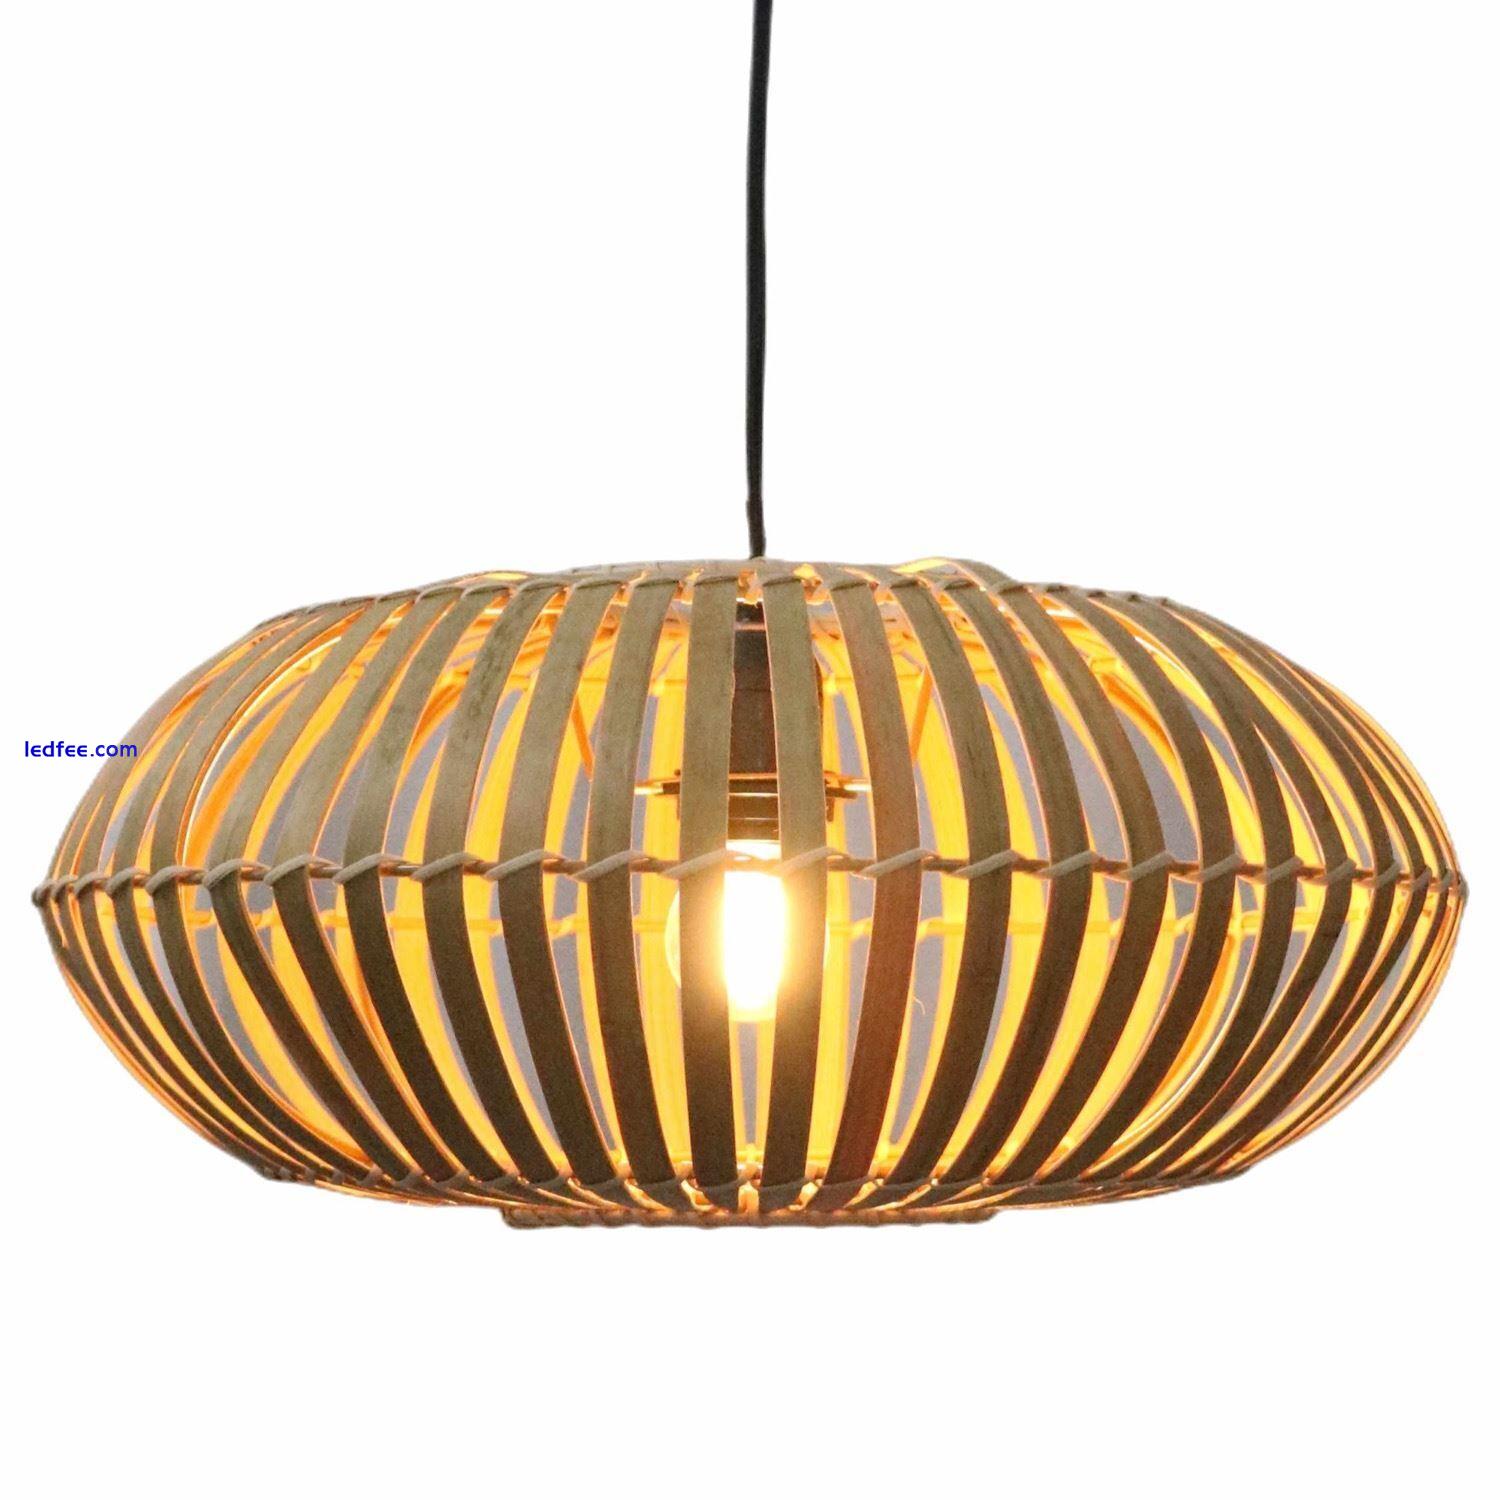 Natural Bamboo Wicker Ceiling Light Shade Pendant Lampshade Easy Fit Scandi Boho 0 